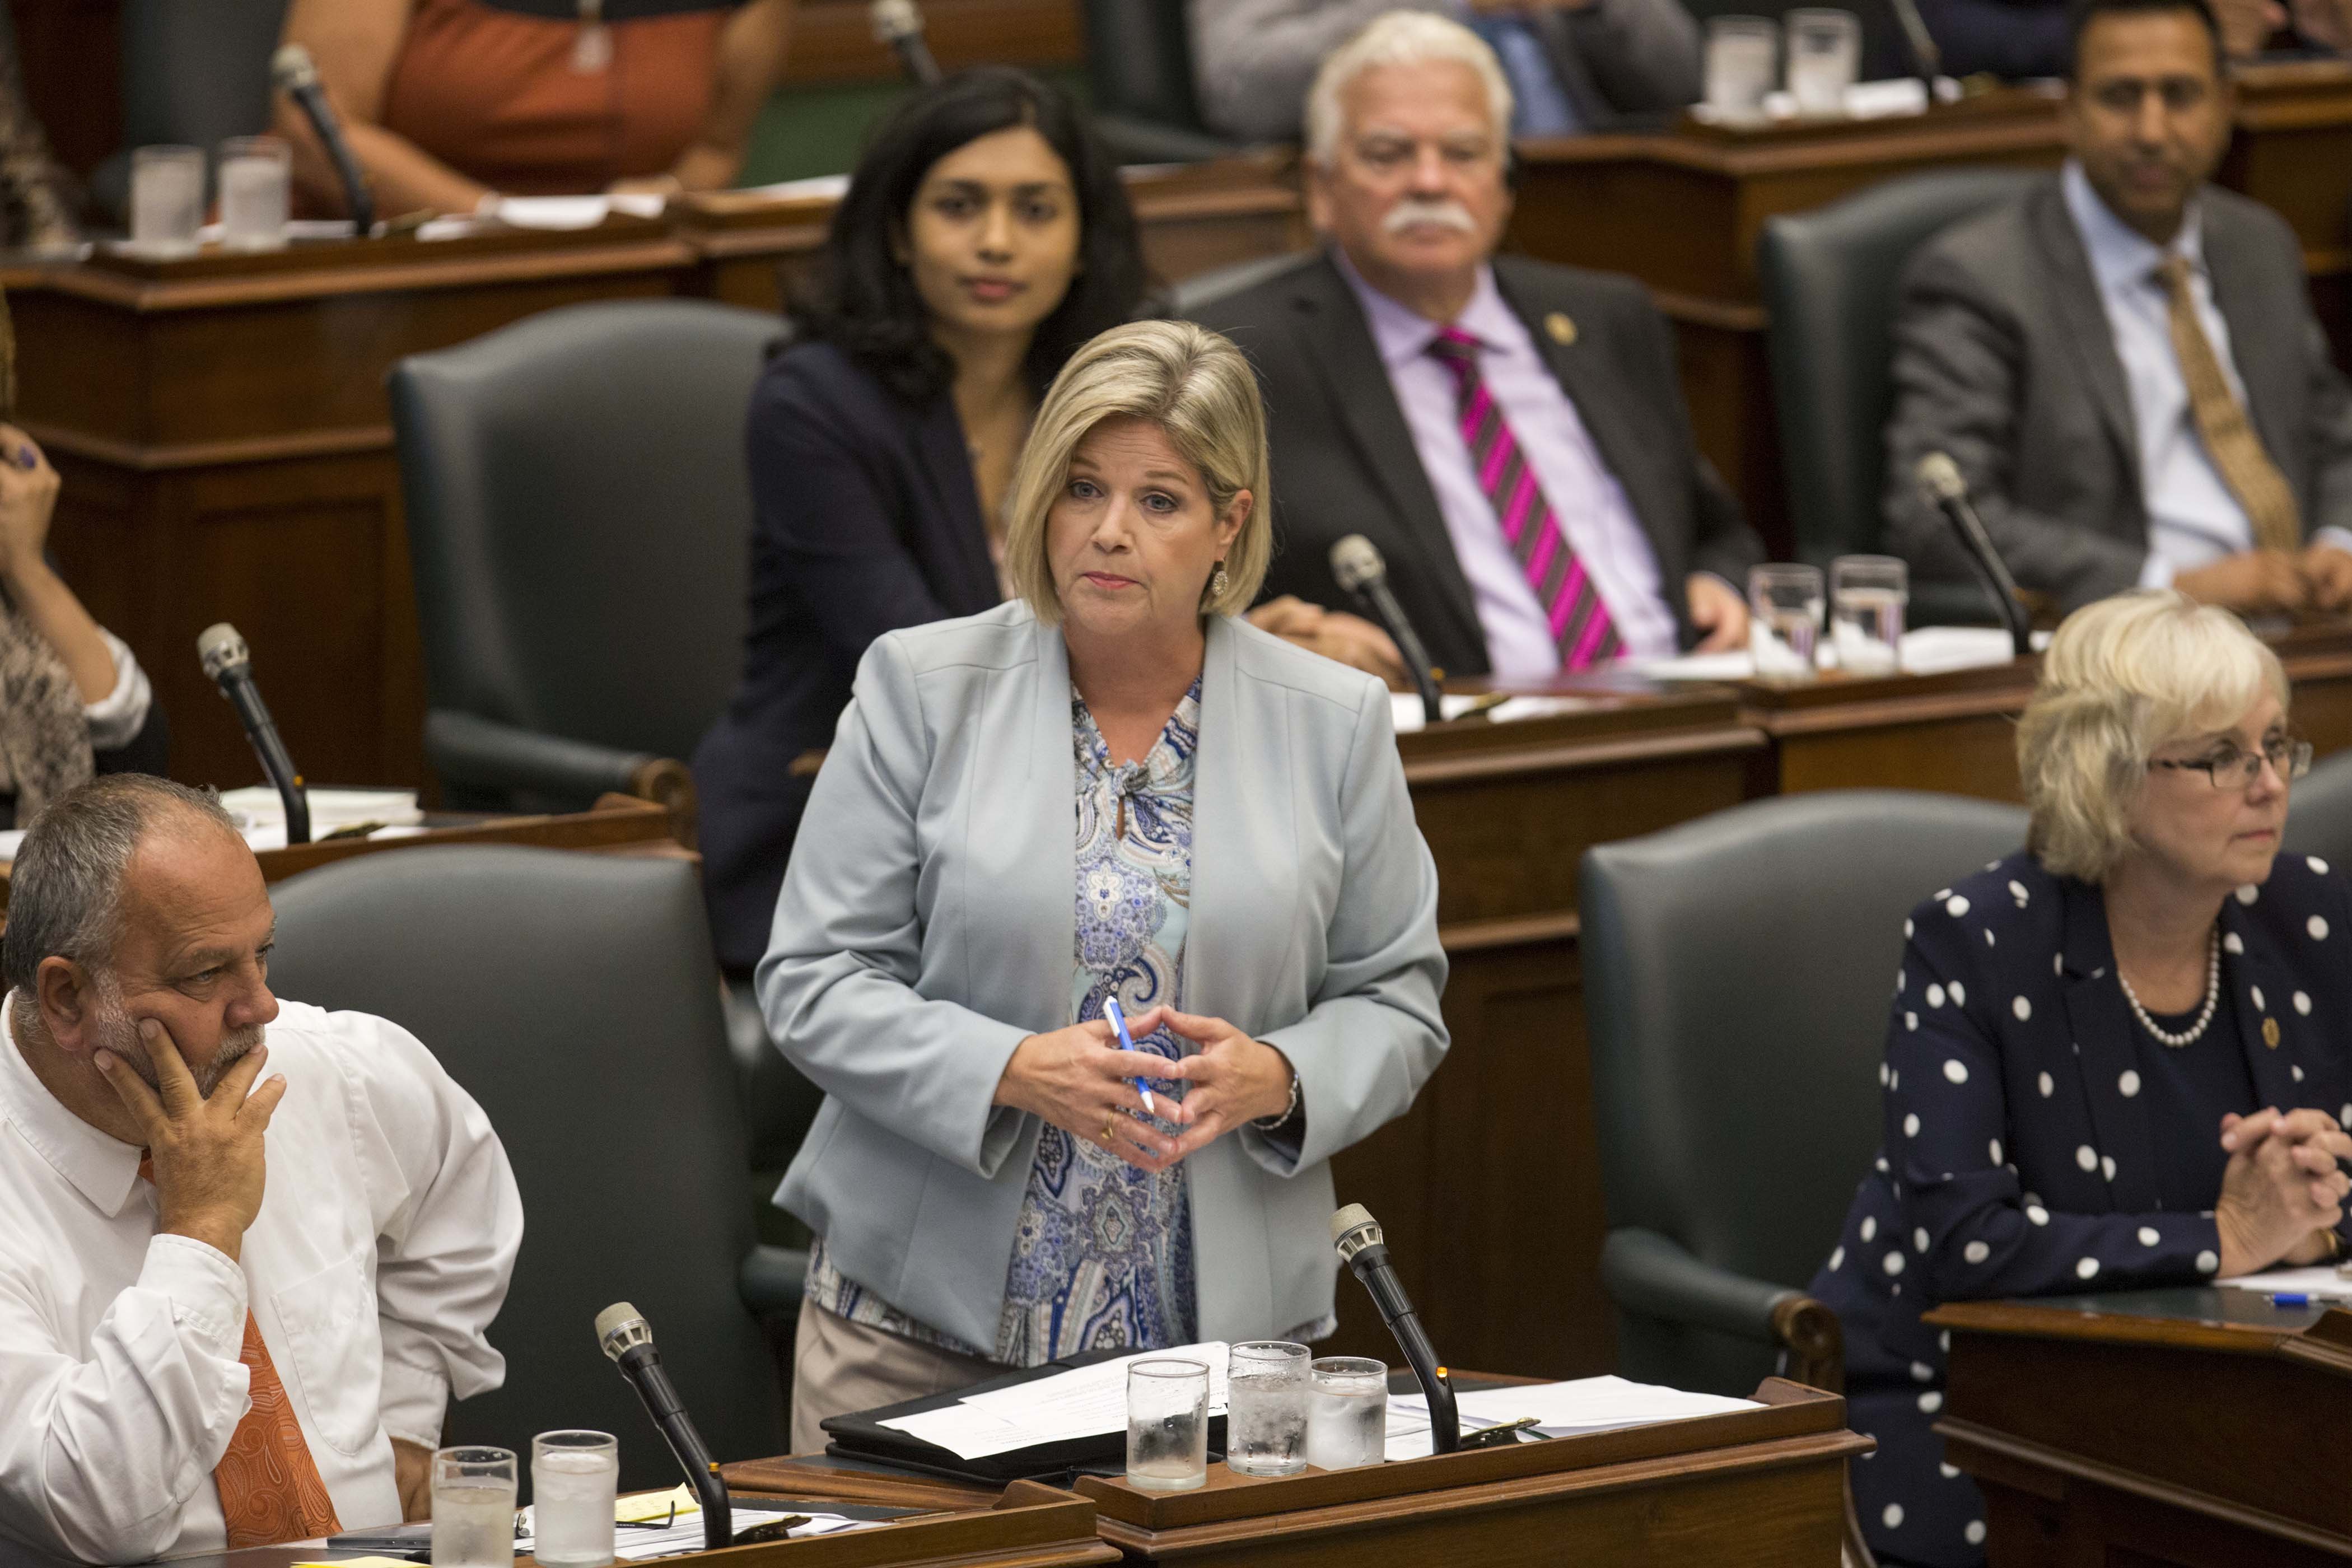 Opposition parties call for expanded sick leave program after government announces extension